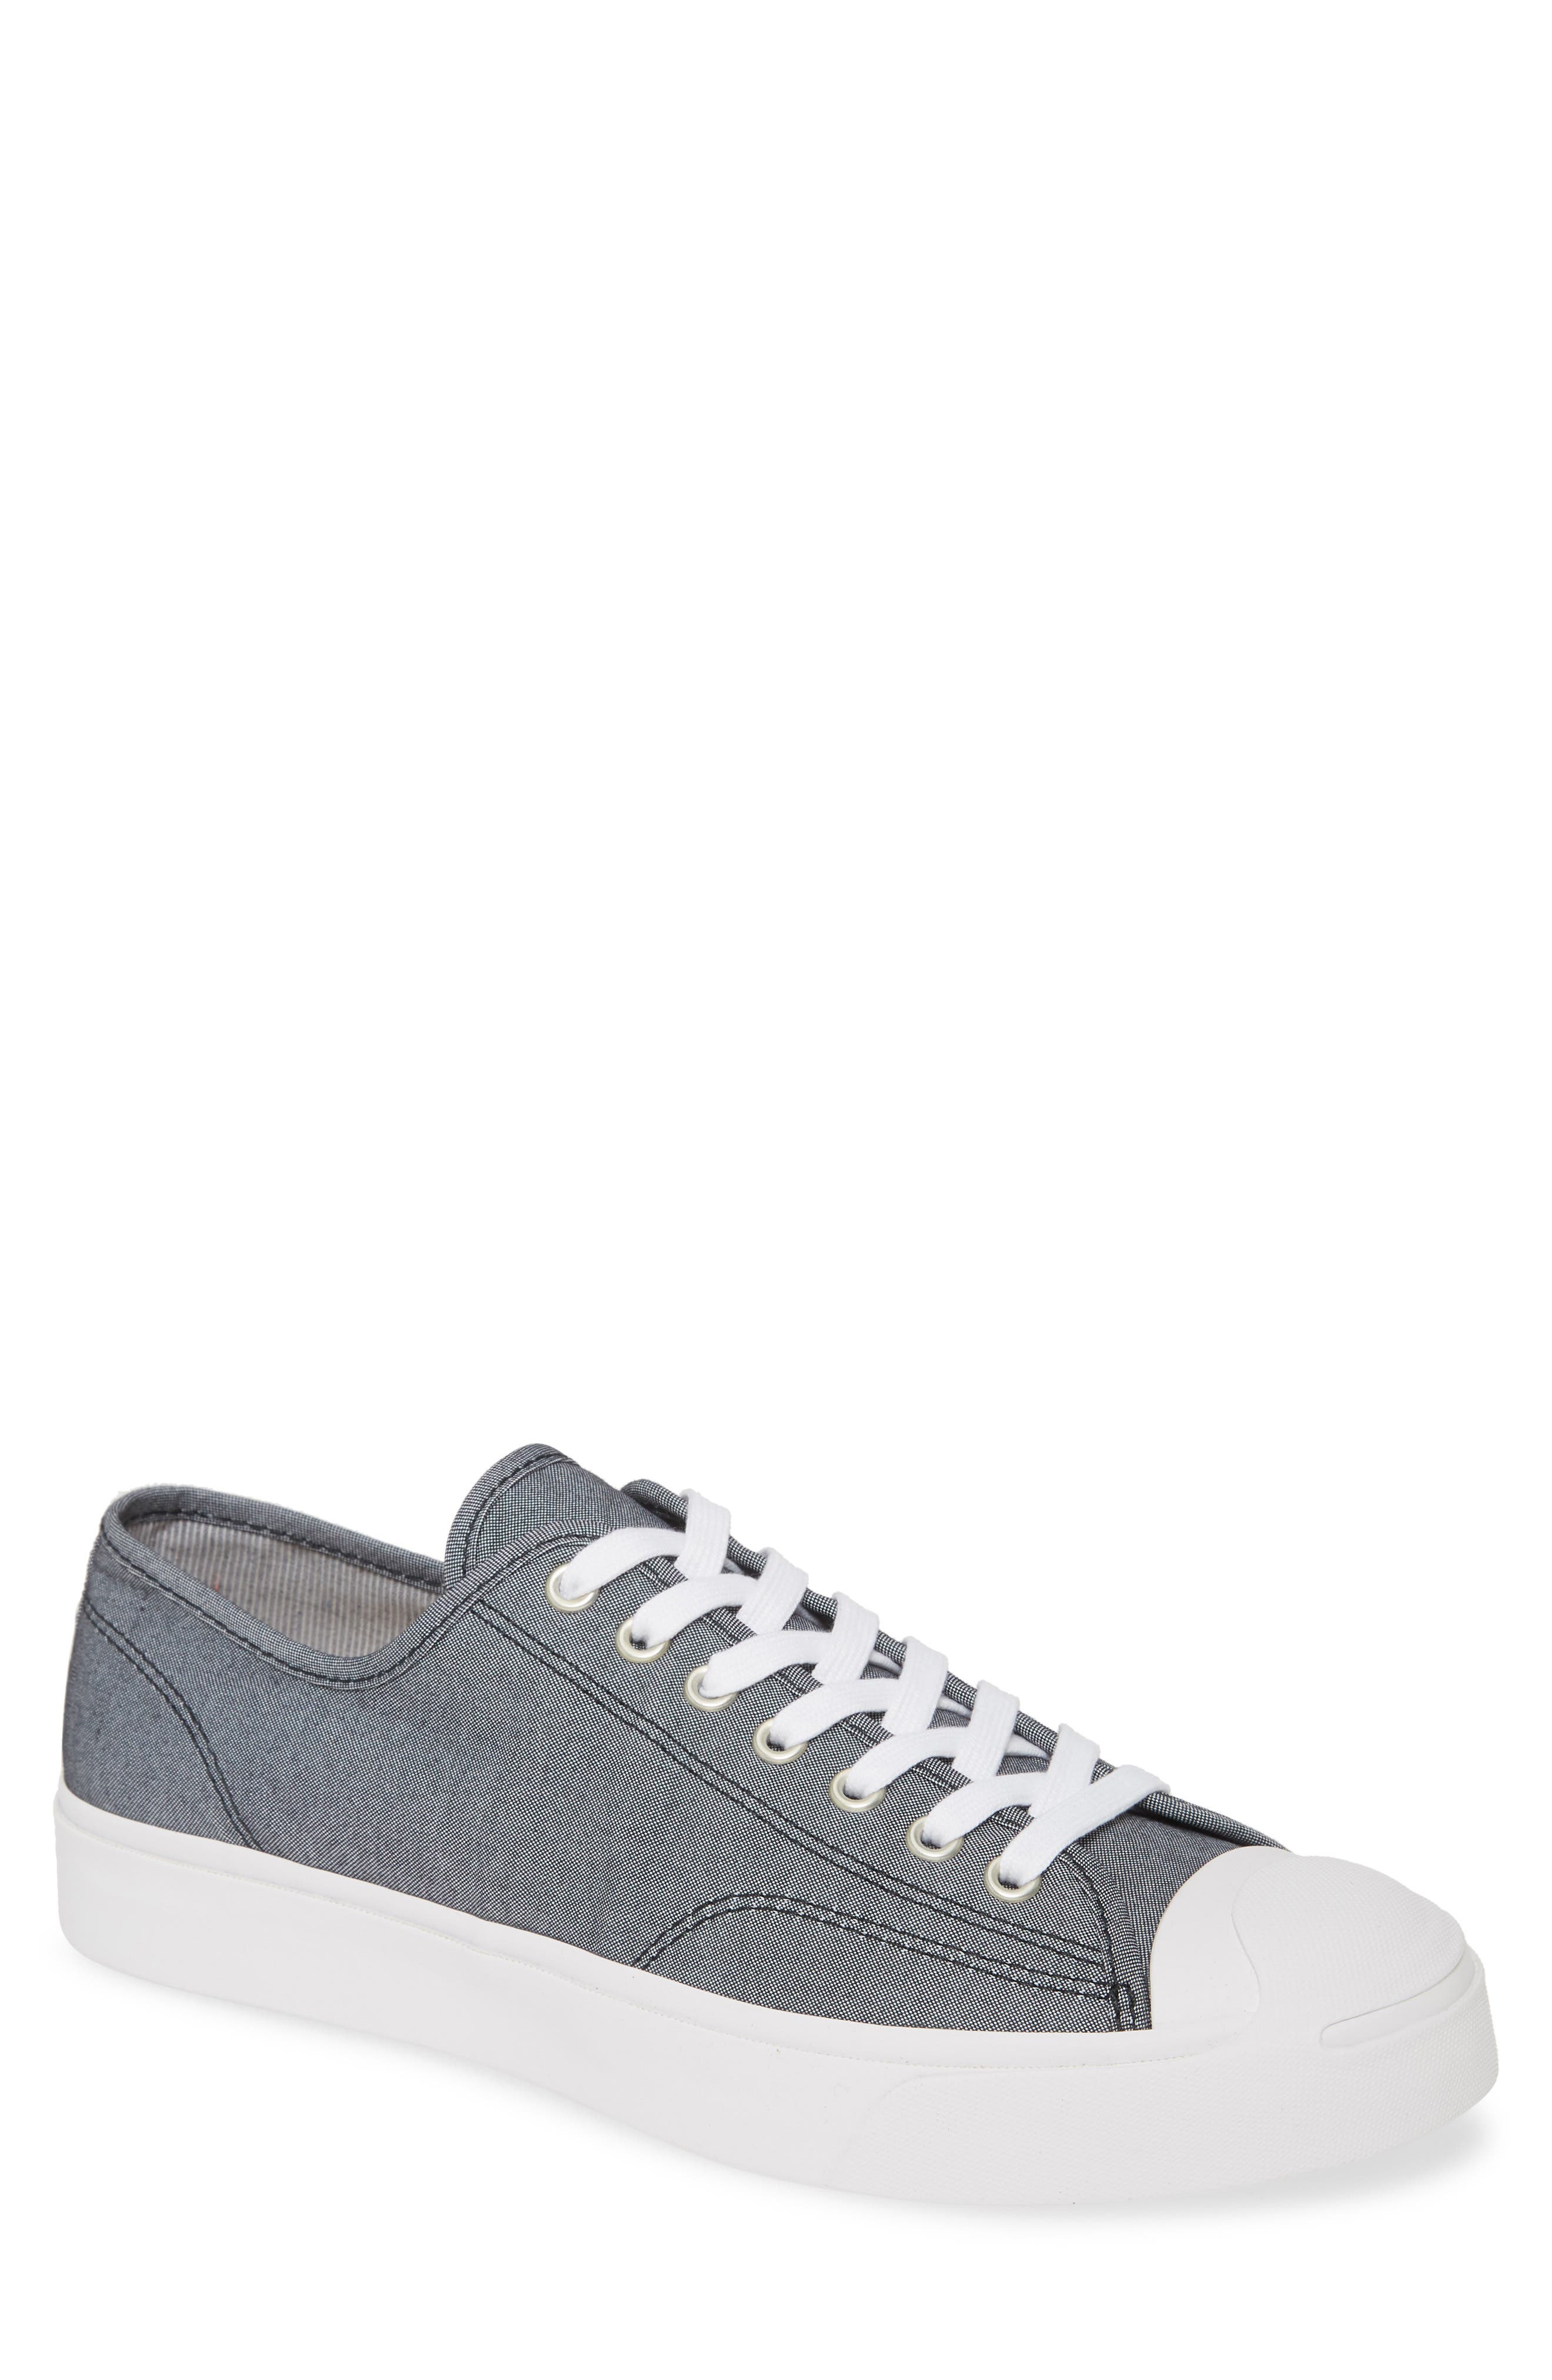 jack purcell gold standard